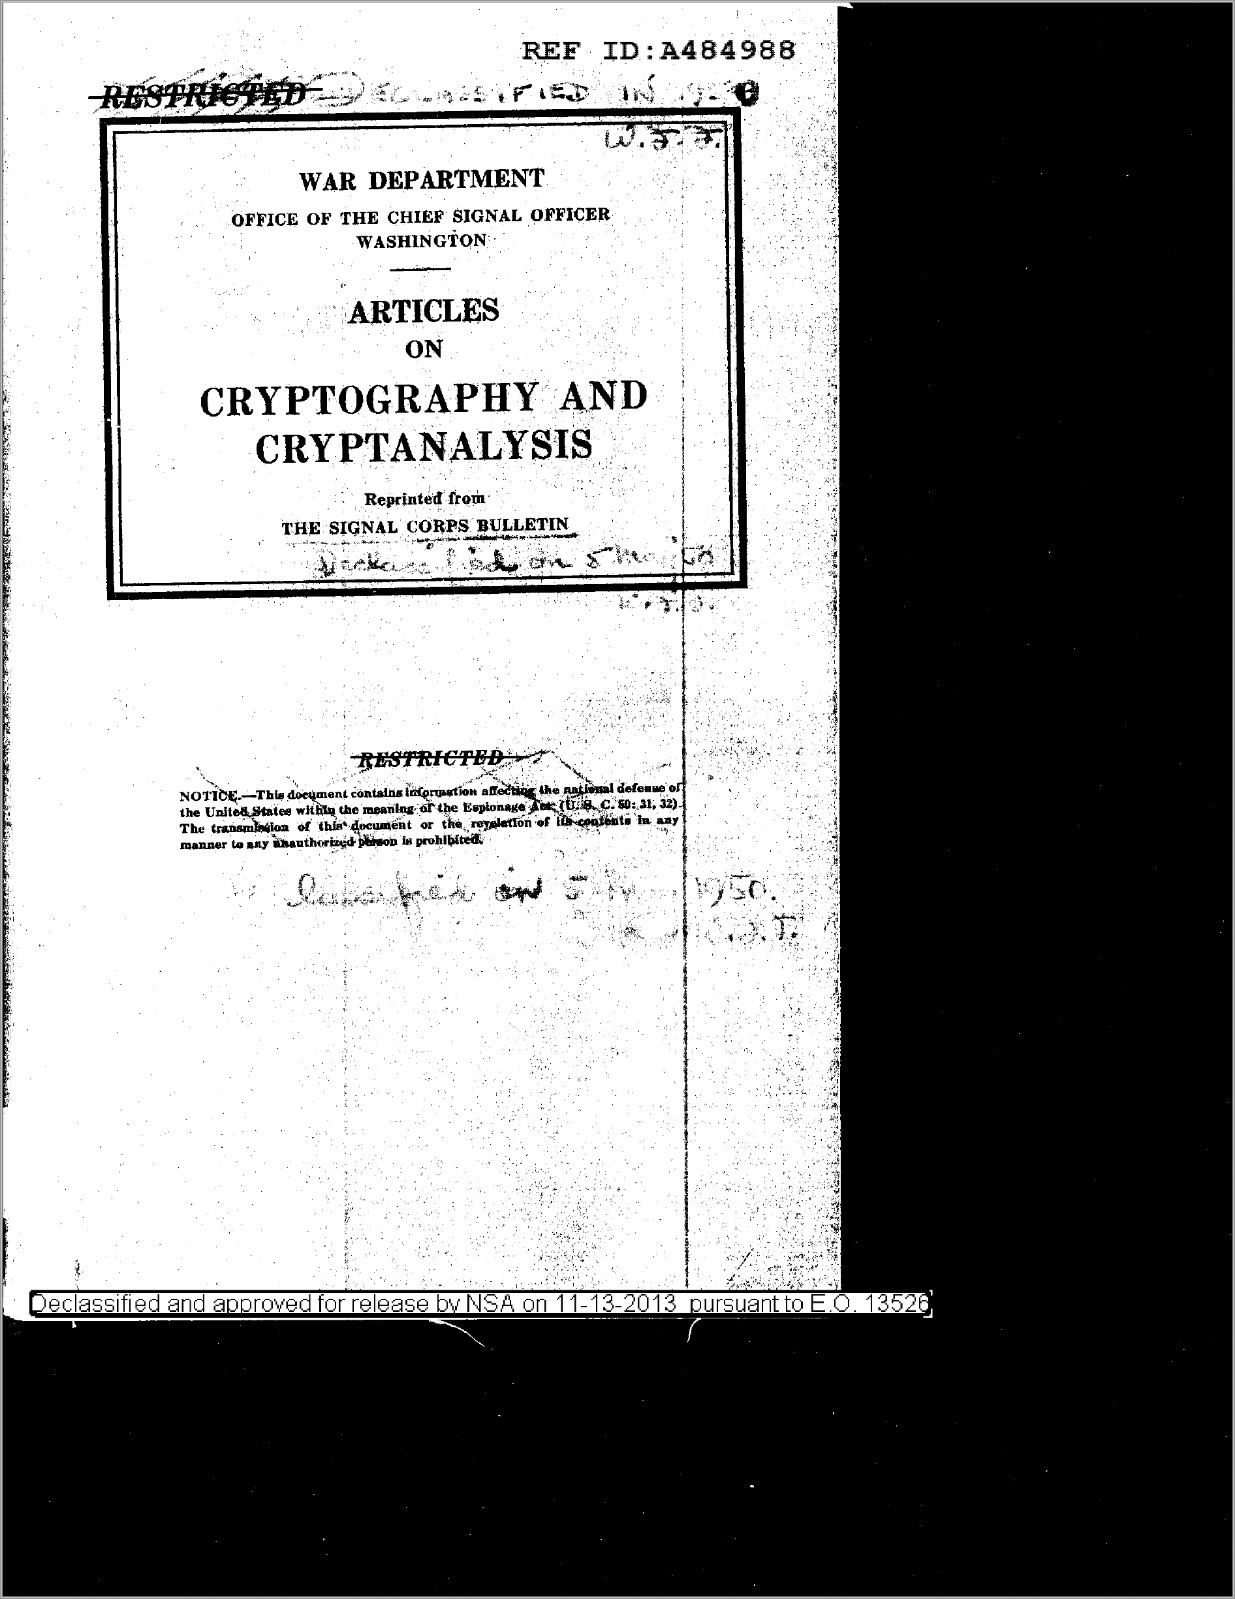 322 Page 1942 Articles On Cryptography & Cryptanalysis Signal Corps Manual on CD